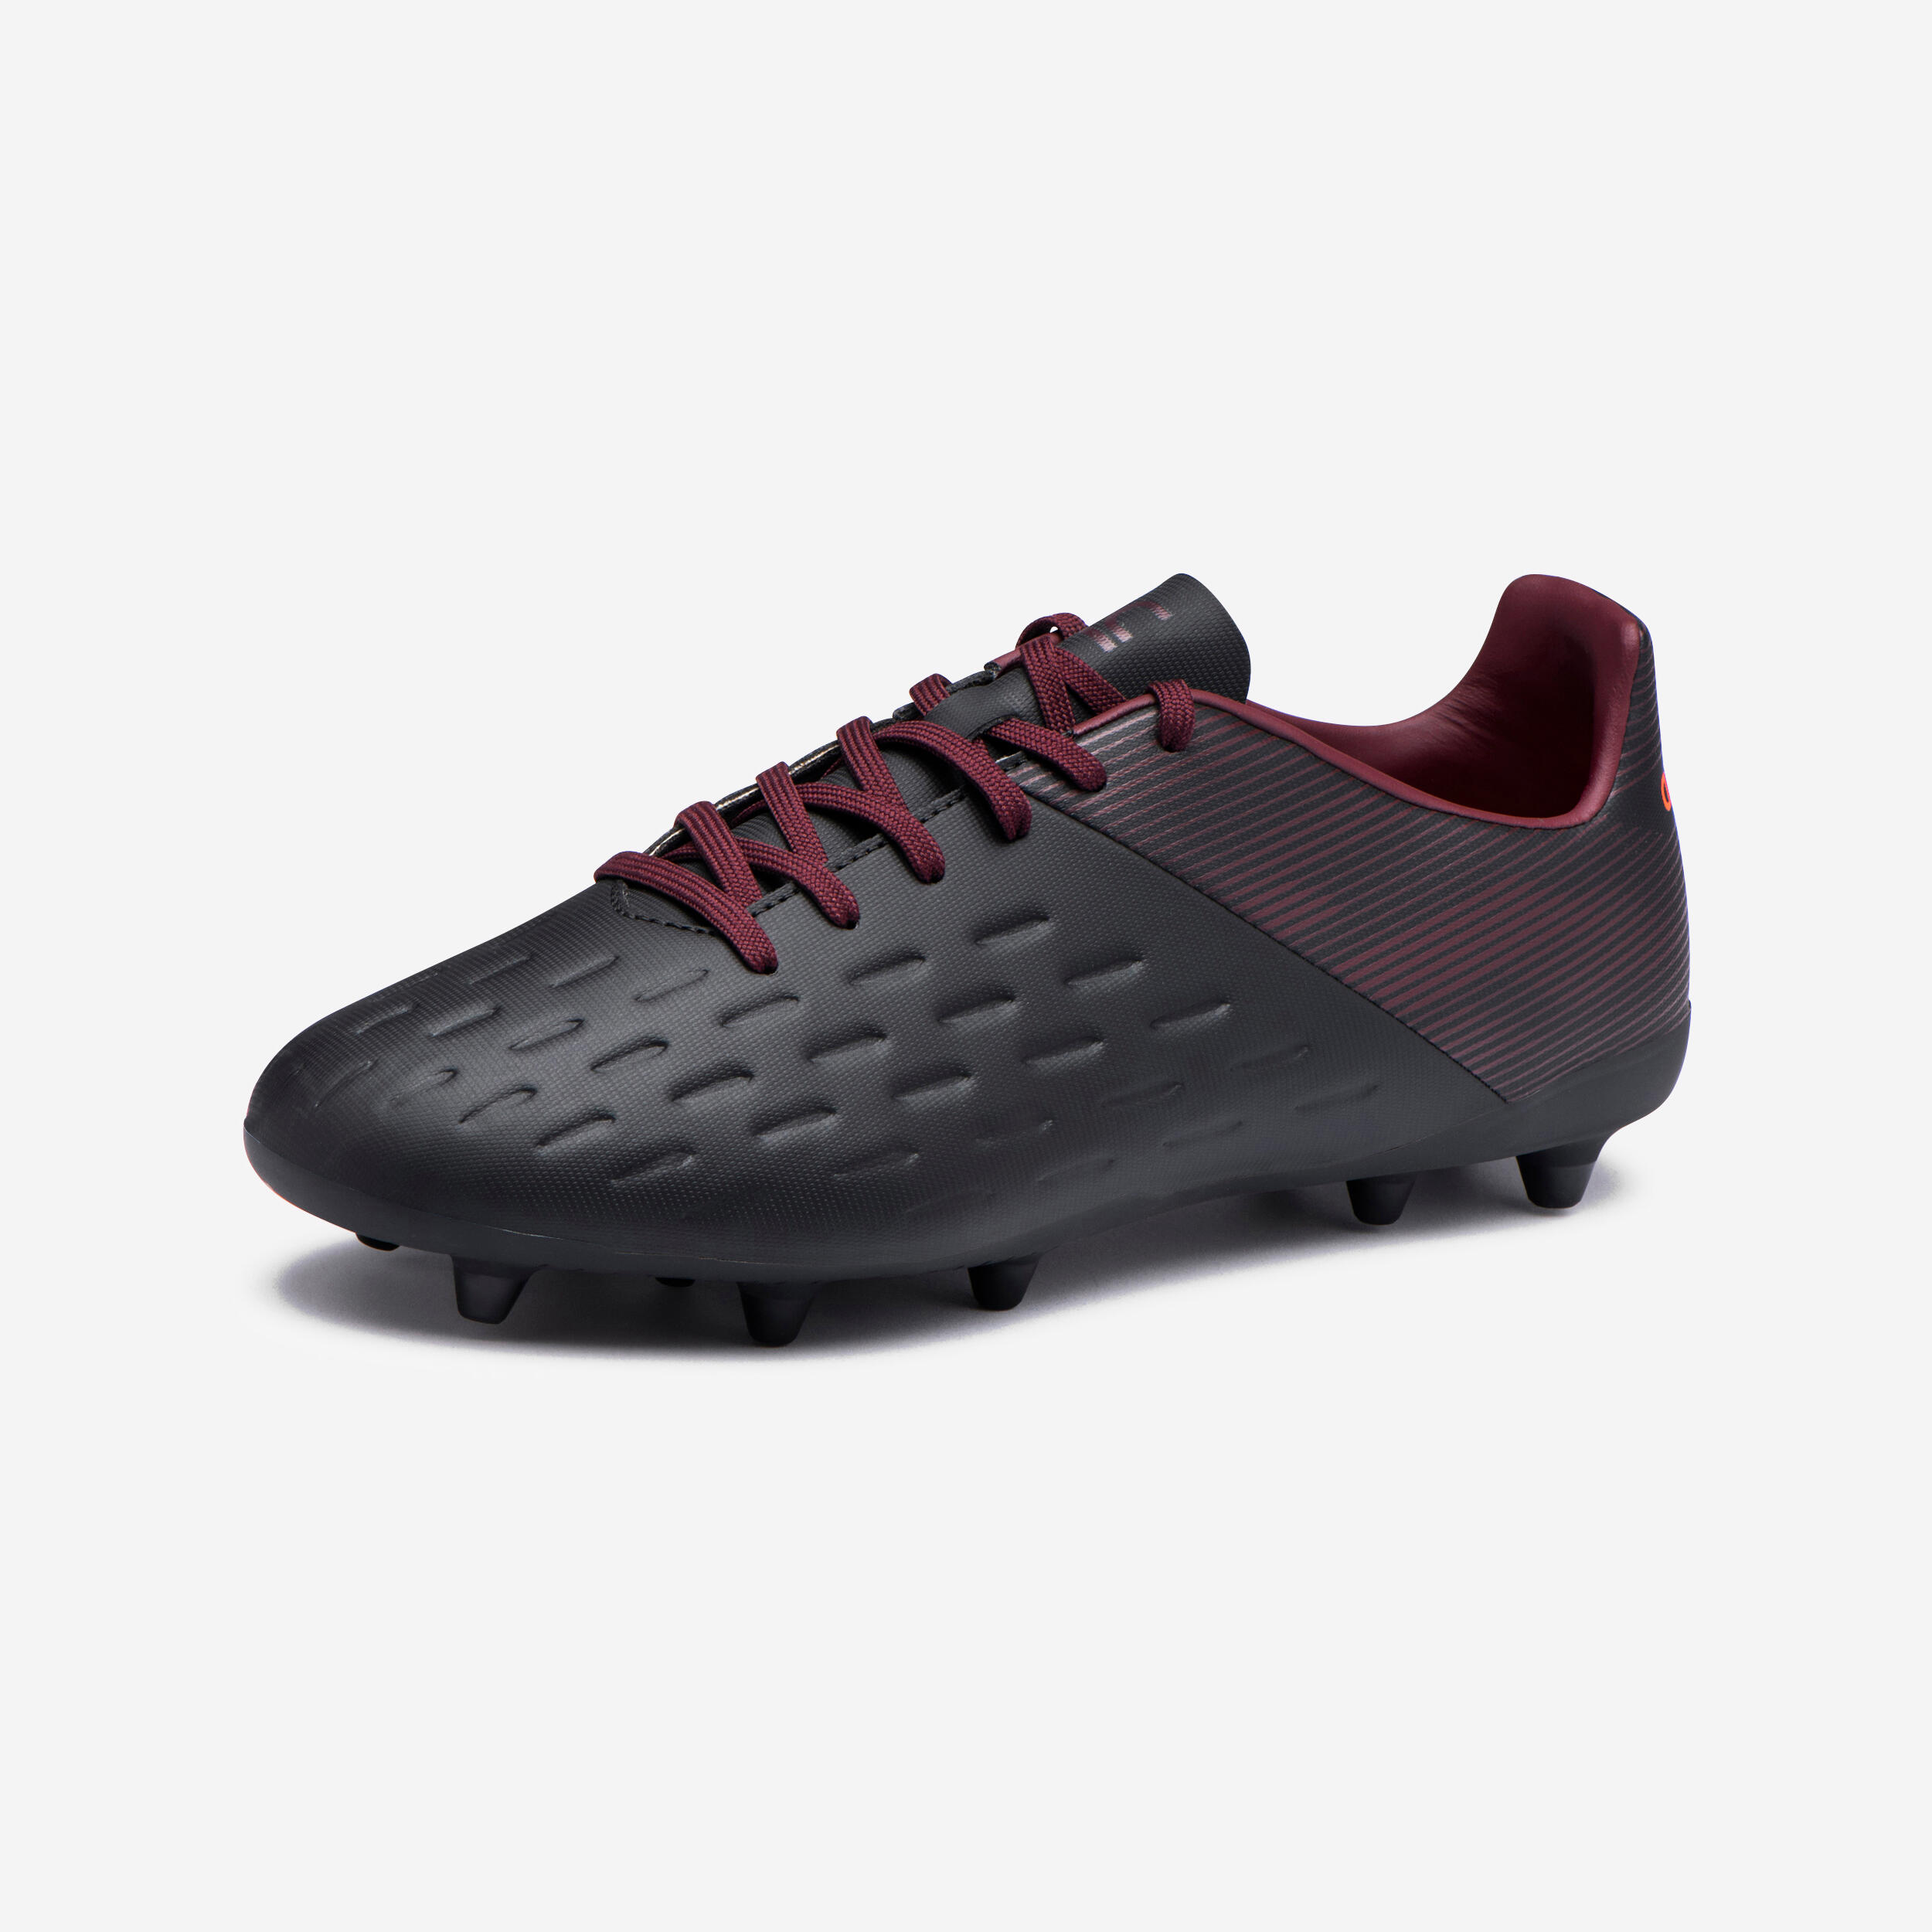 Men's Moulded Dry Pitch Rugby Boots Advance R100 FG - Black/Burgundy 1/9